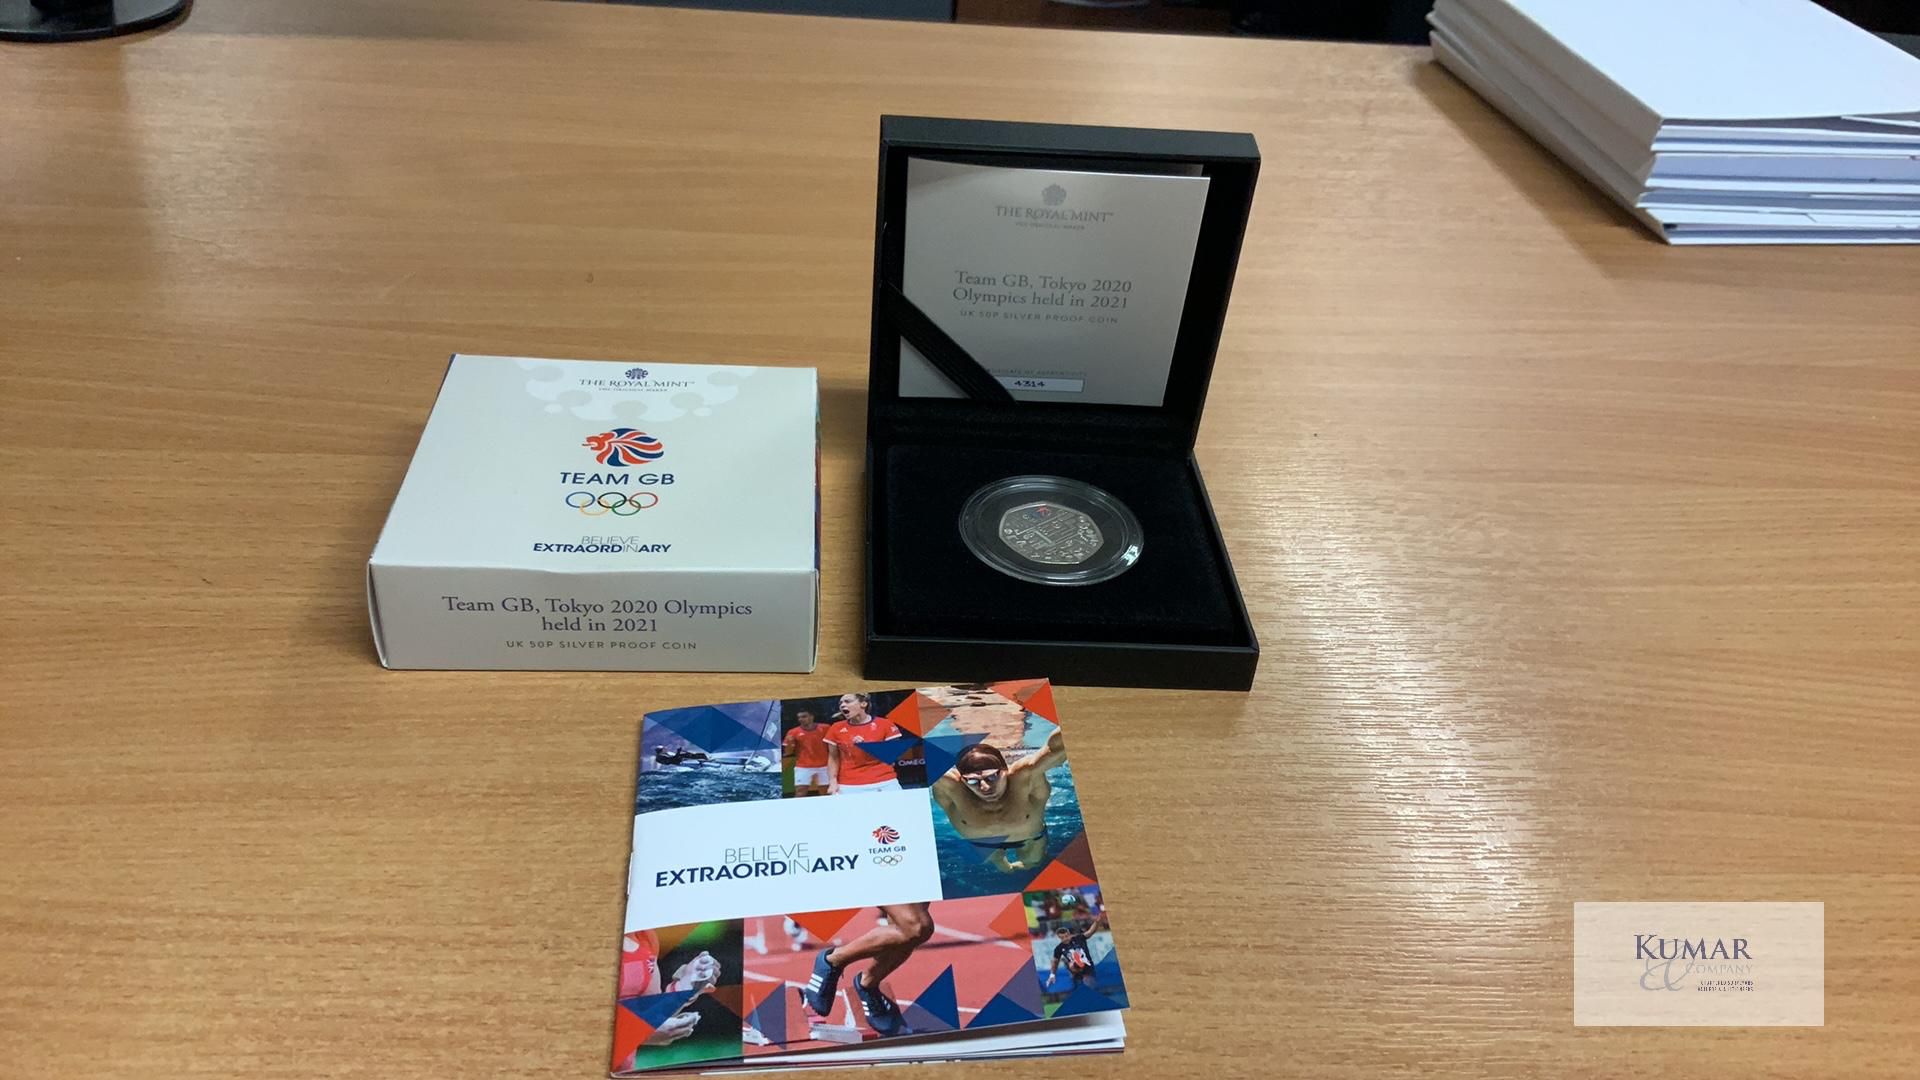 The Royal Mint Coin- Team GB Tokyo 2020 Olympics Held in 2021 2021 UK 50p Silver Proof Coin - Bild 2 aus 4